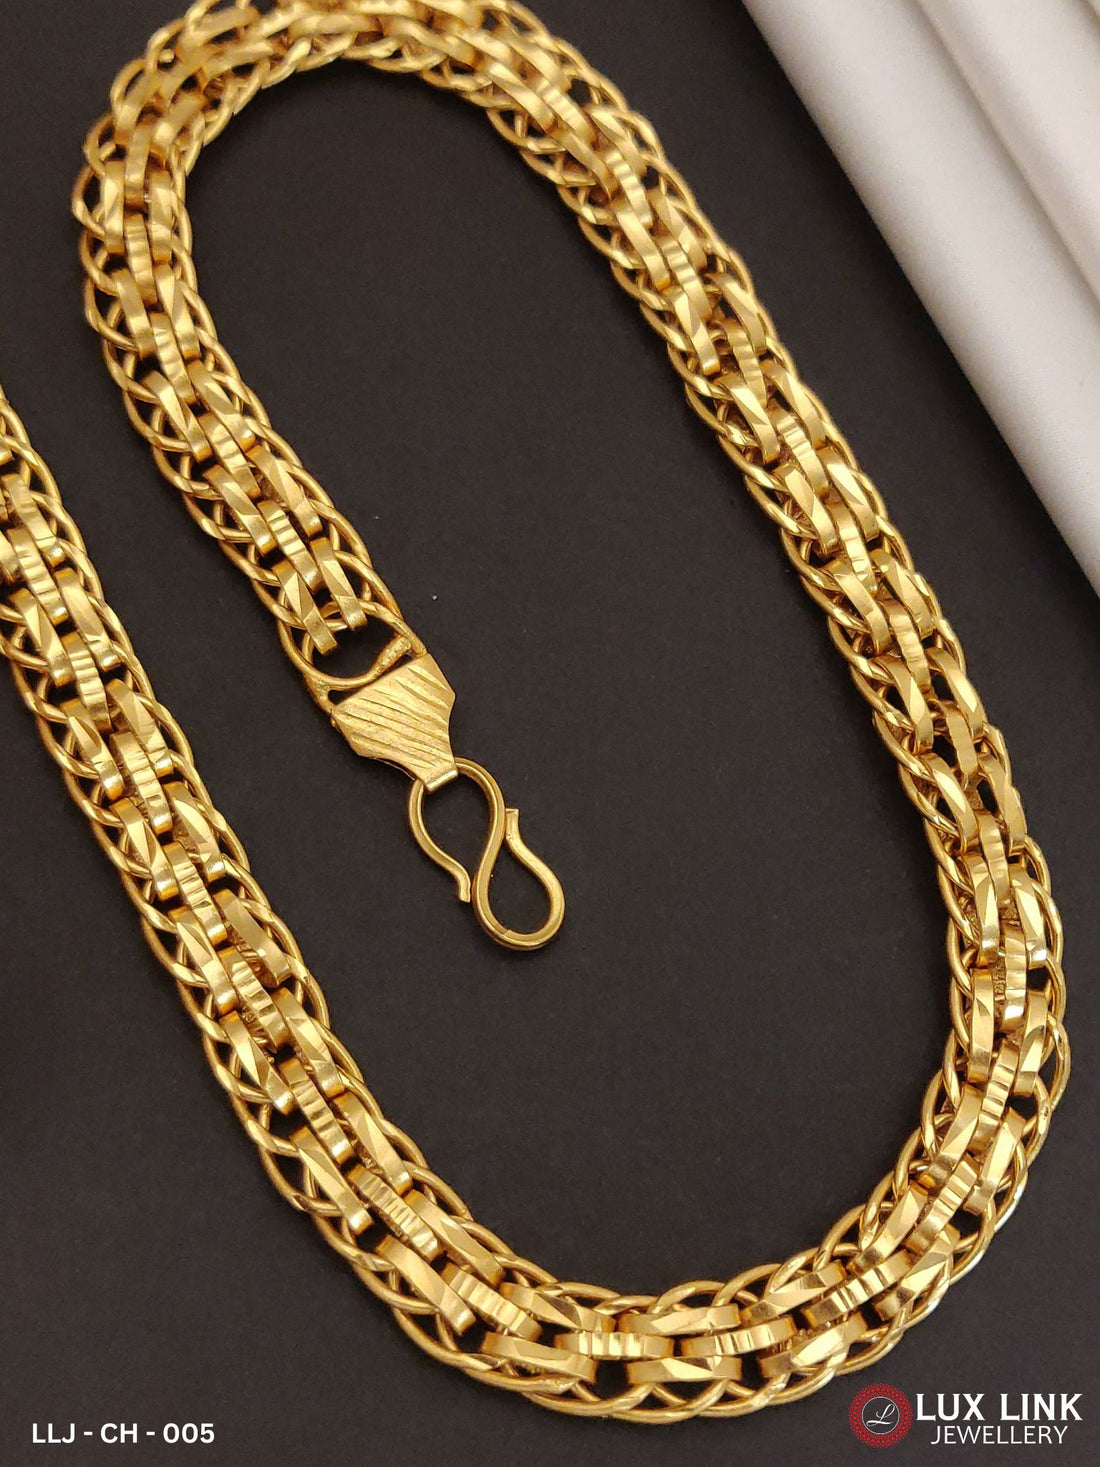 Exclusive Linked Round Kadi Chain for Men - CH-005